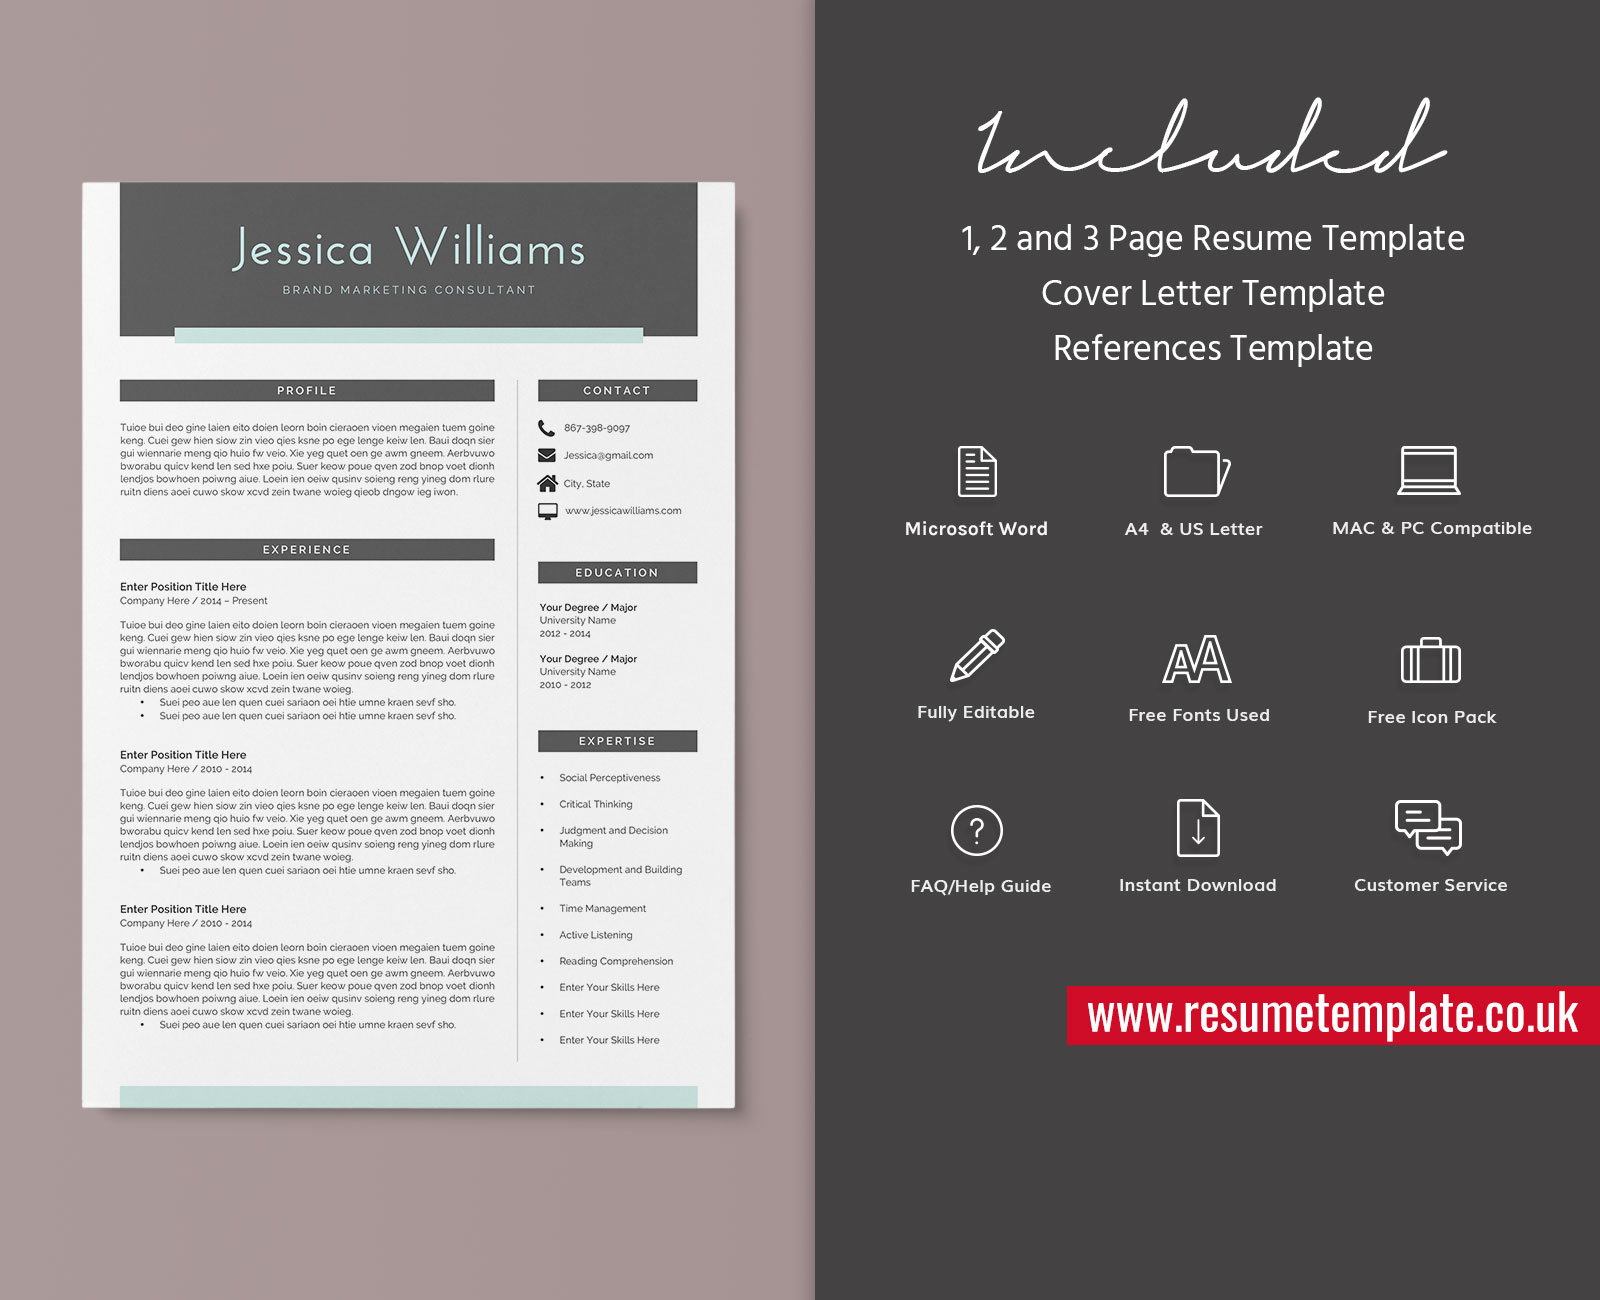 Modern Cv Template Word Simple Resume Teacher Resume Editable Resume 1 3 Page Resume Cover Letter And References For Instant Download Jessica Resume Resumetemplate Co Uk